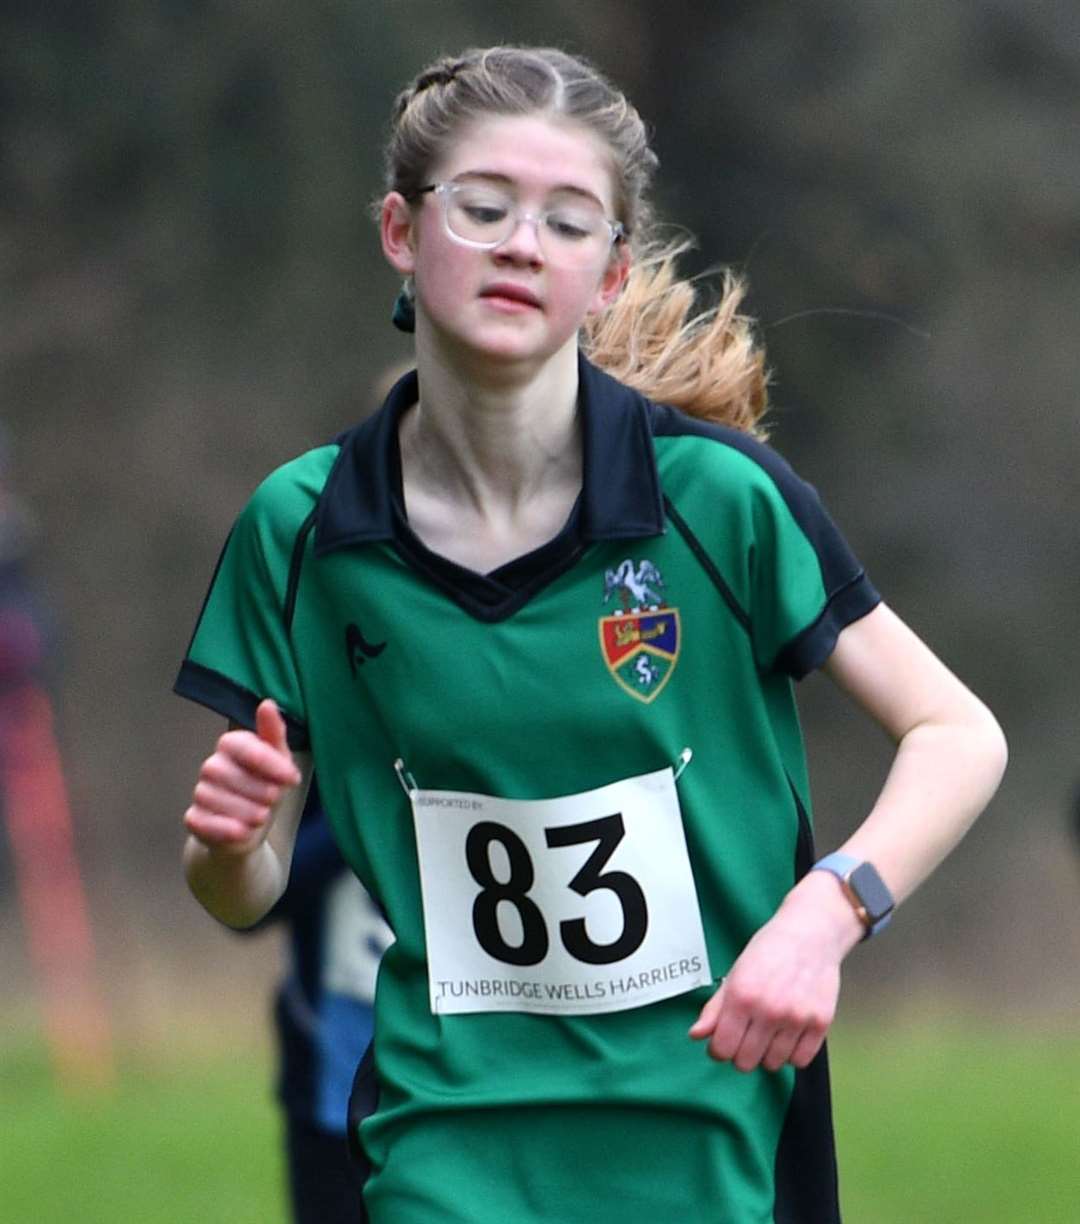 Lois Baisley of Thanet was 13th in the Year 7 girls' race. Picture: Barry Goodwin (54437847)